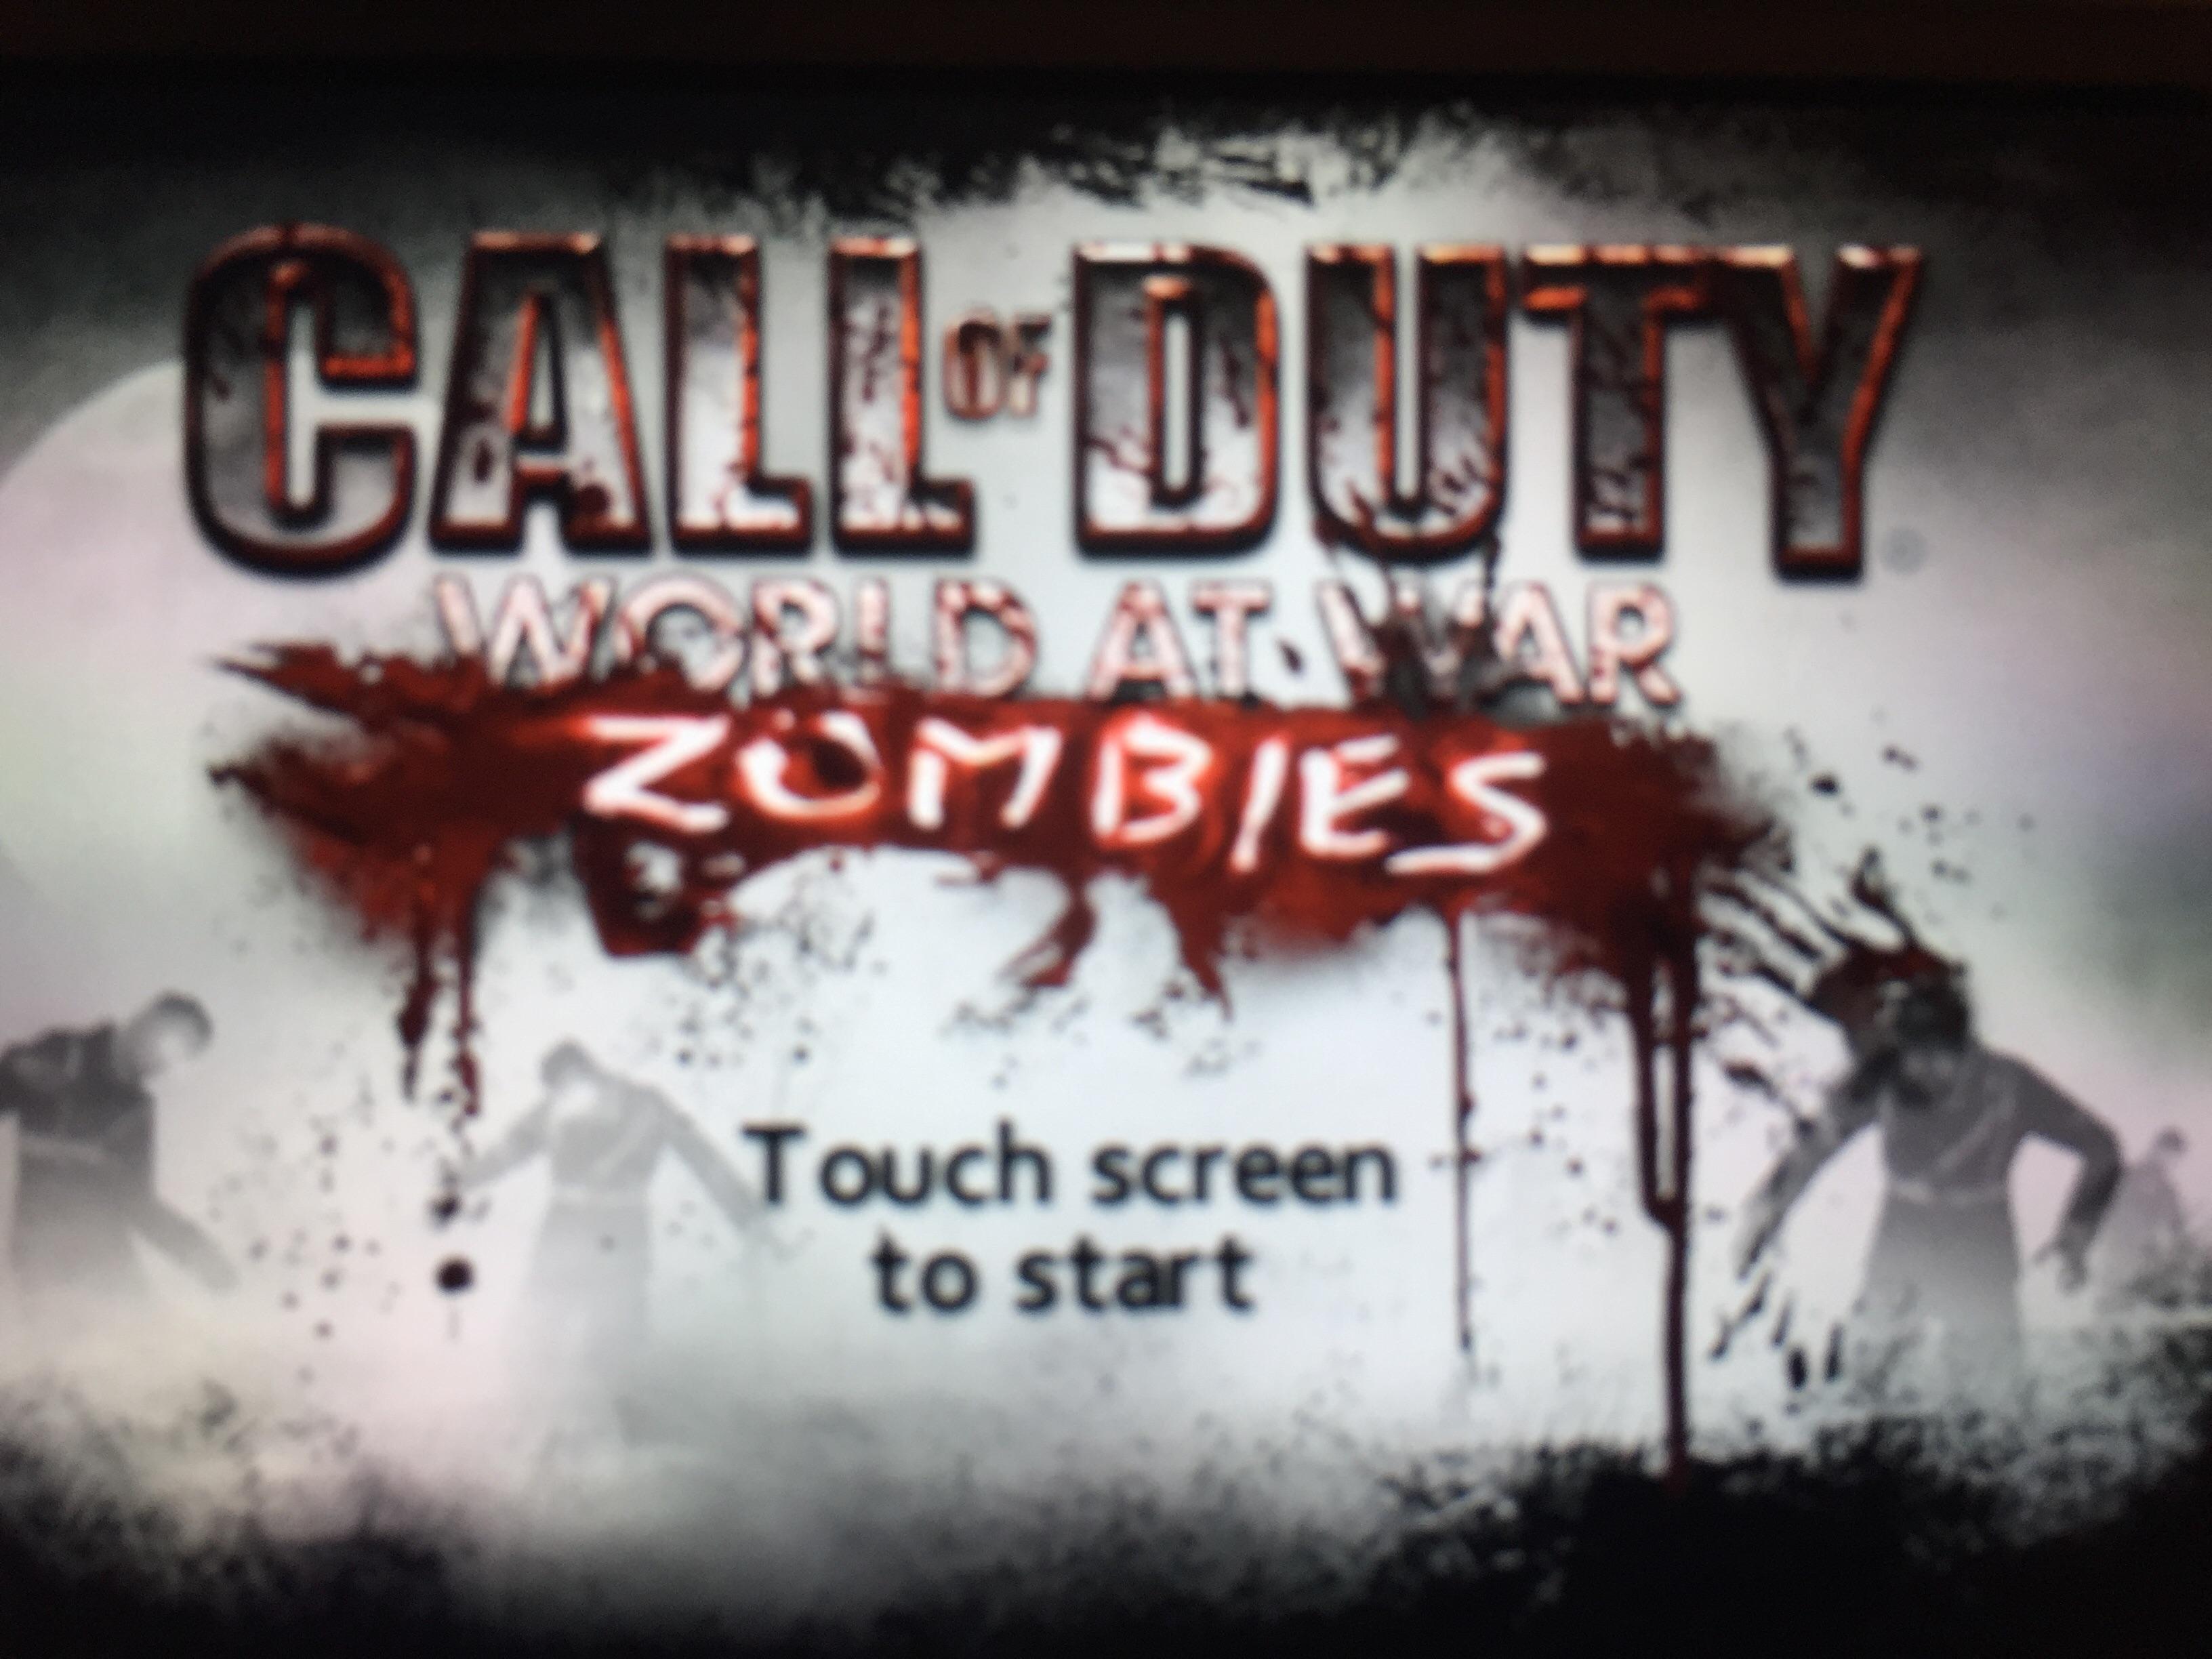 call of duty waw zombies free download android